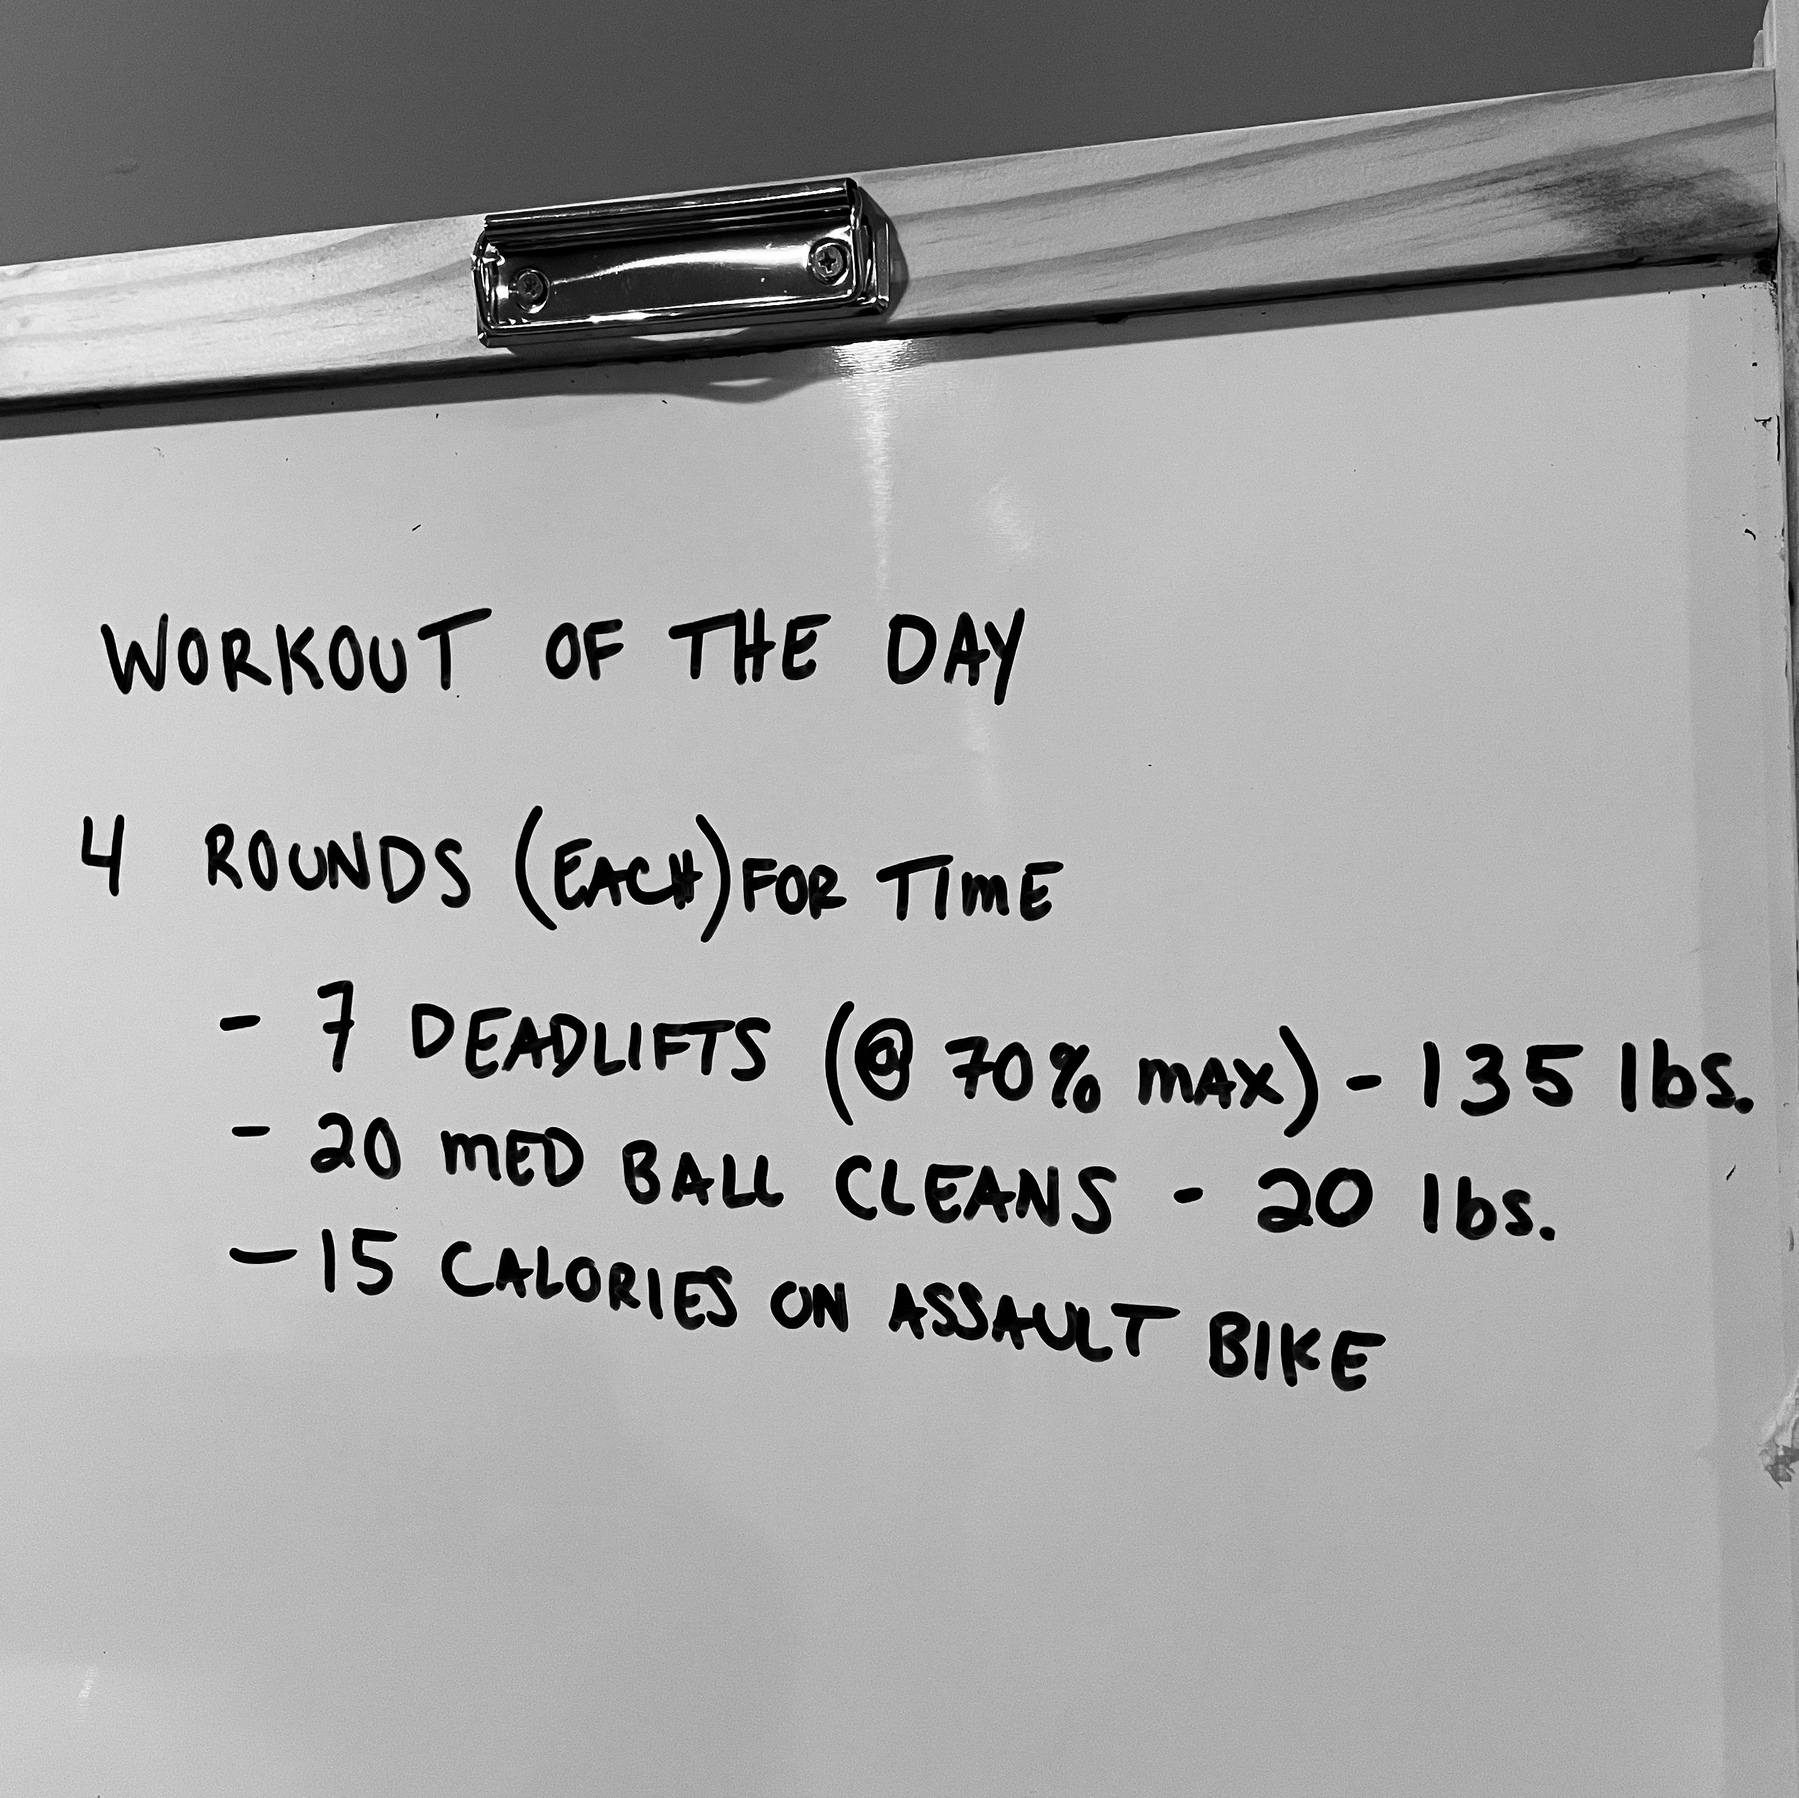 whiteboard with workout written on it